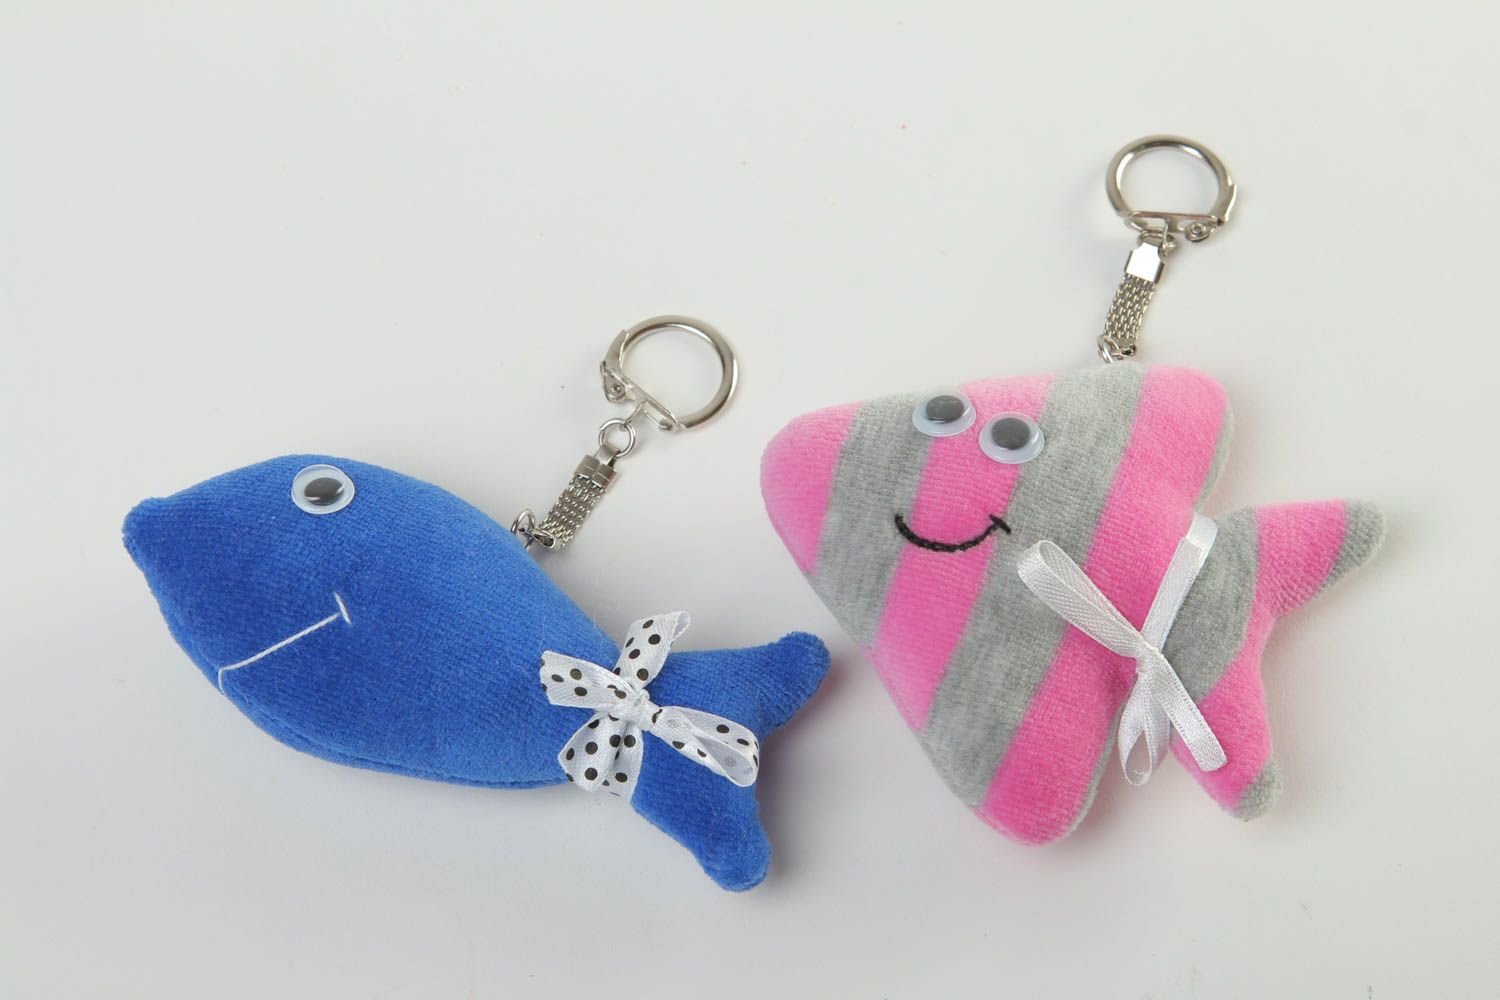 Handmade key accessories 2 designer keychains kids gifts for decorative use only photo 2